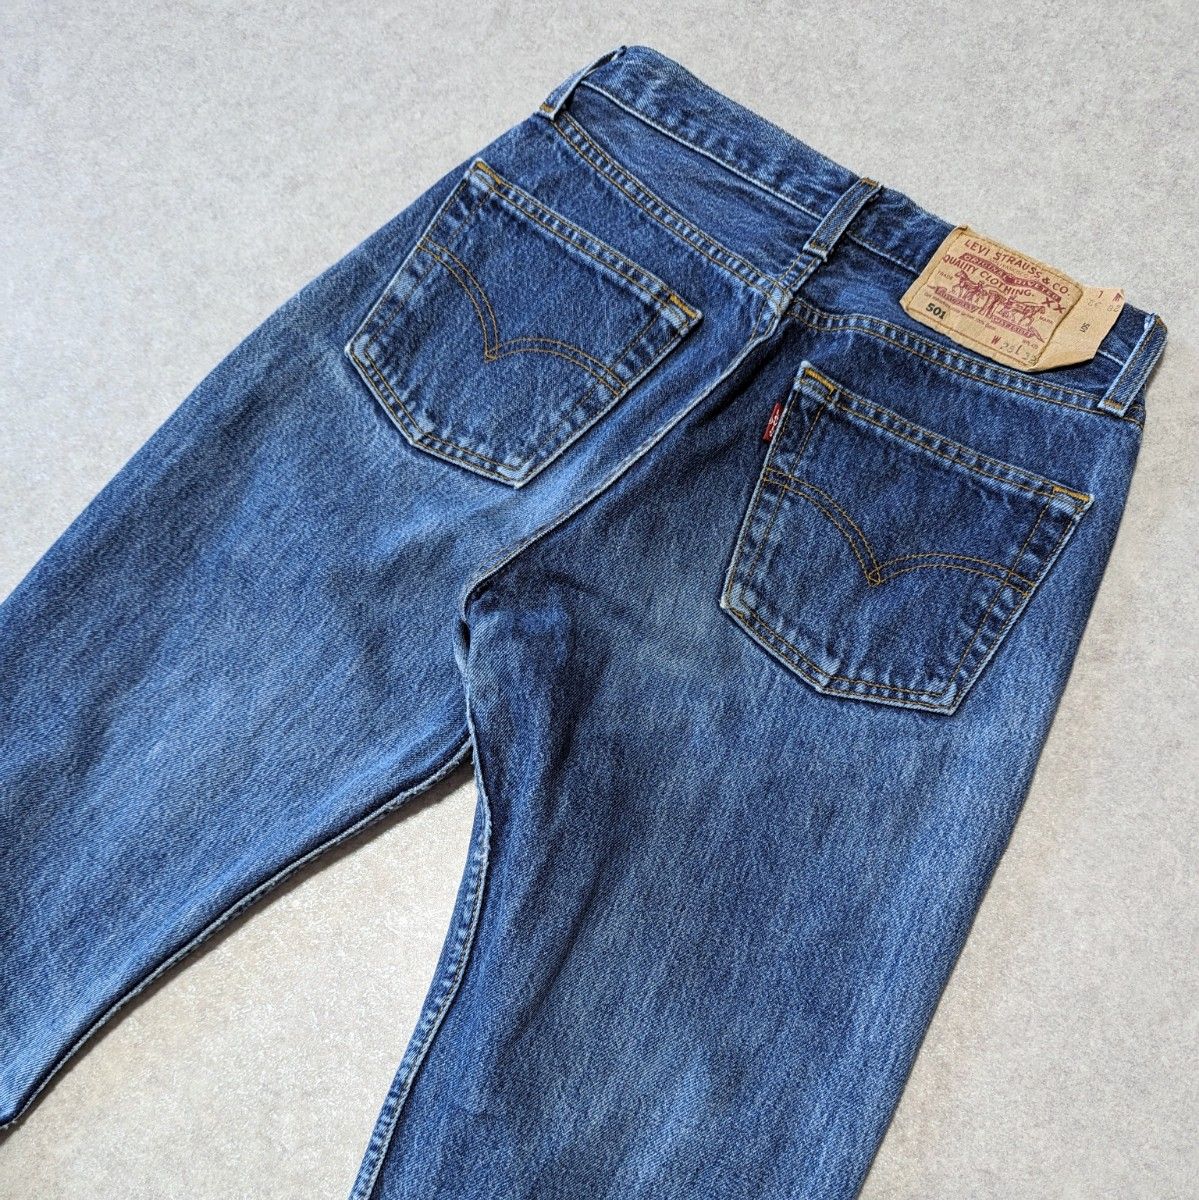 90's EURO Levi's 501 Made in Poland